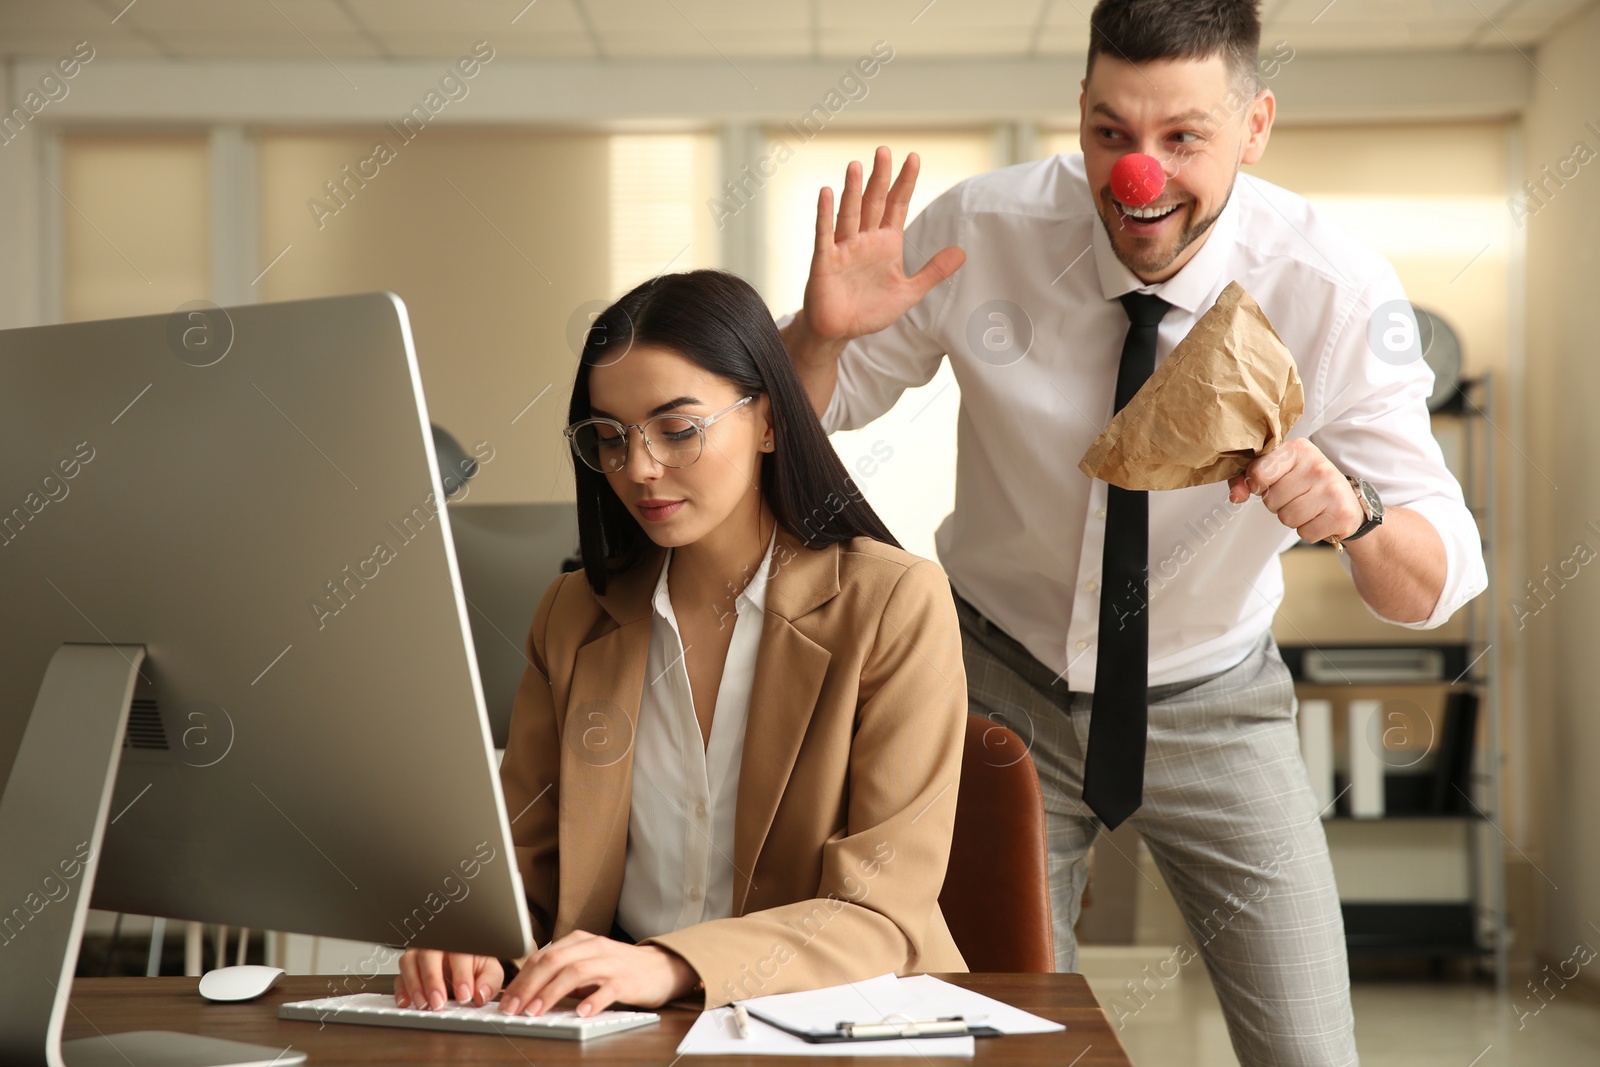 Photo of Man popping paper bag behind his colleague in office. Funny joke